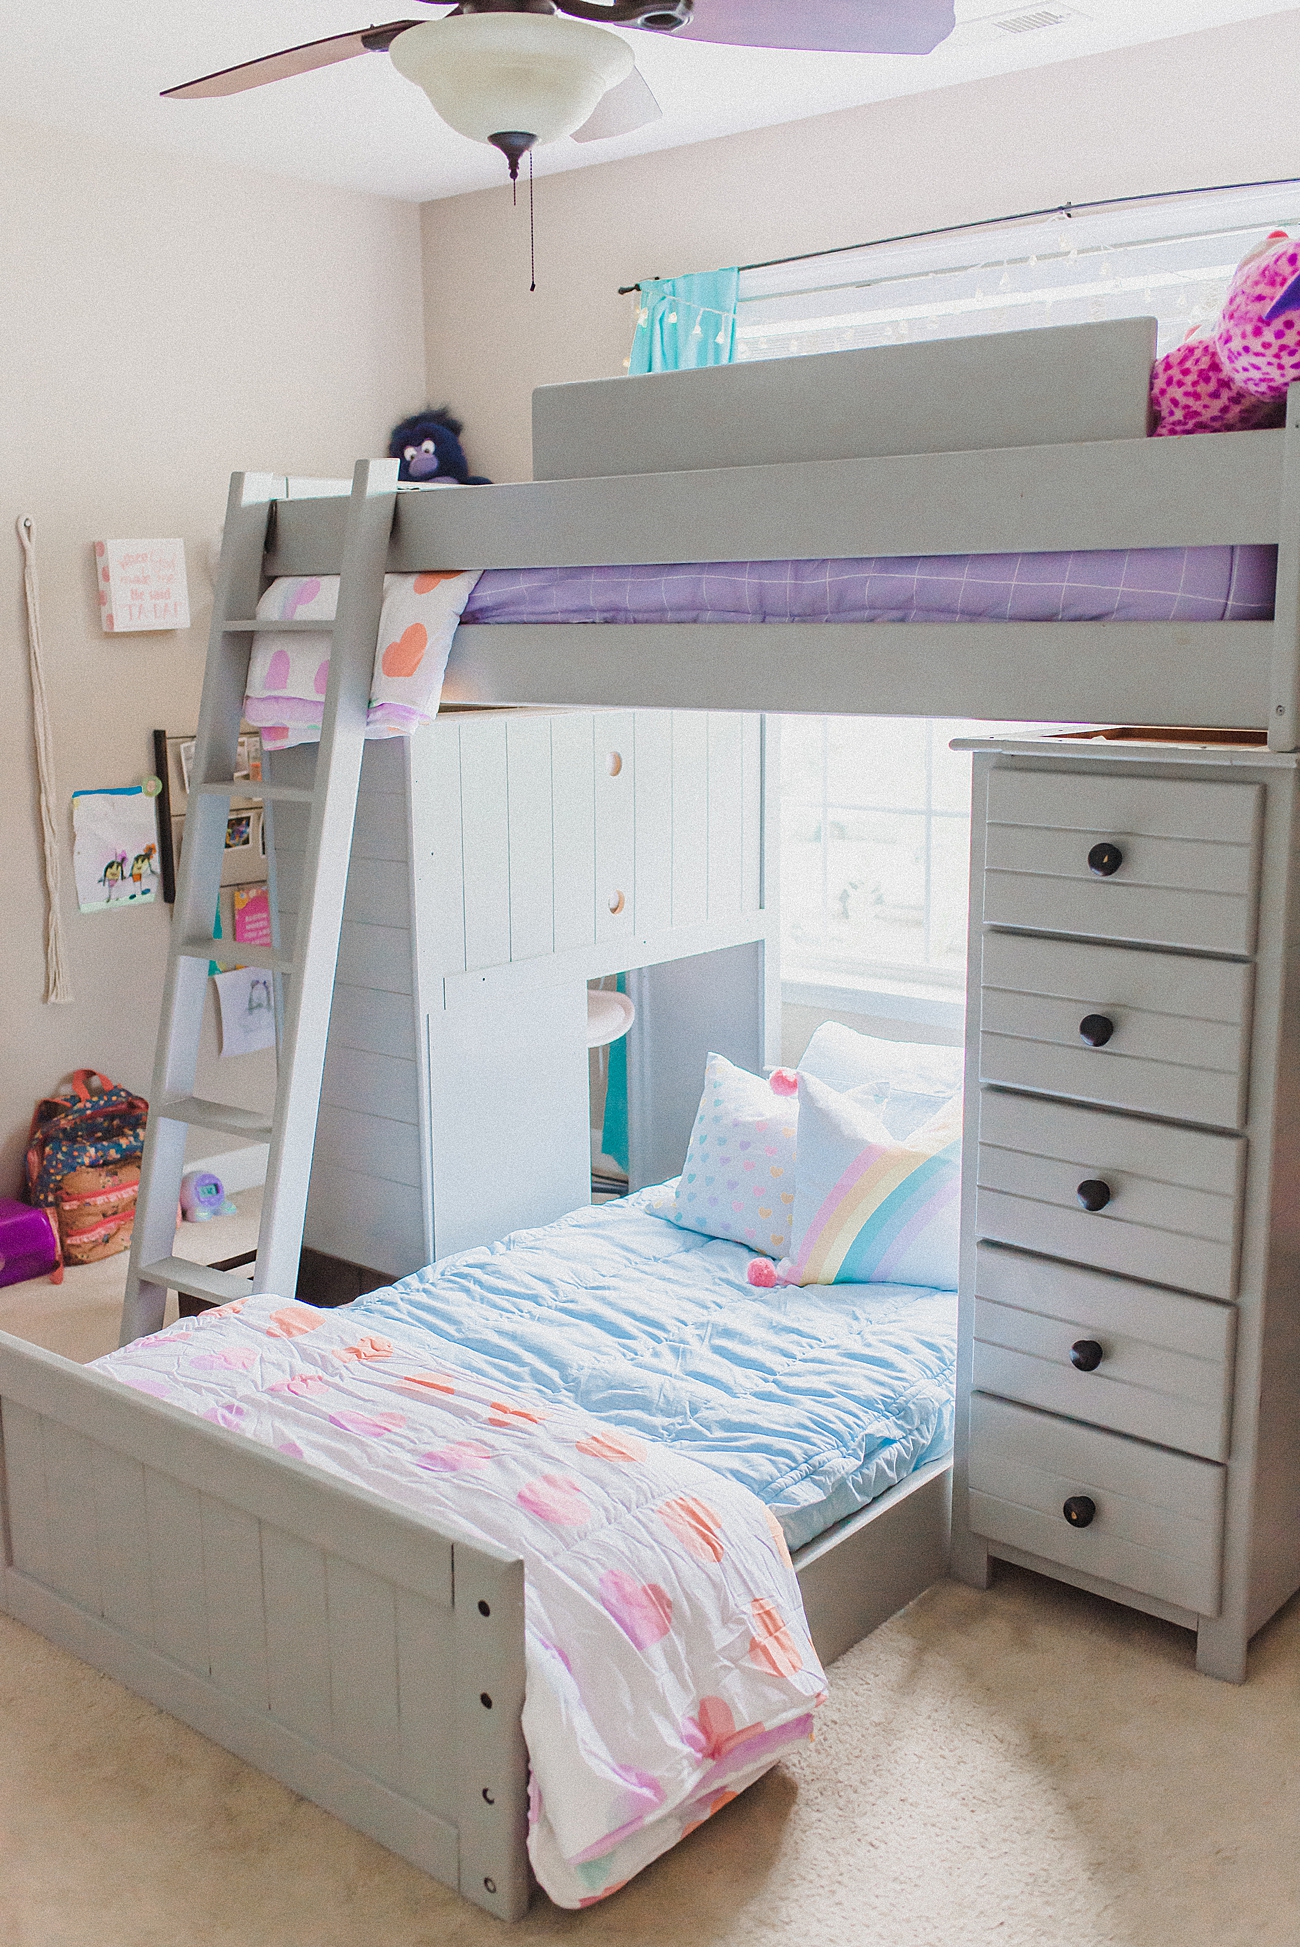 The Best Bedding For Bunk Beds Beddy, Bunk Bed Reviews